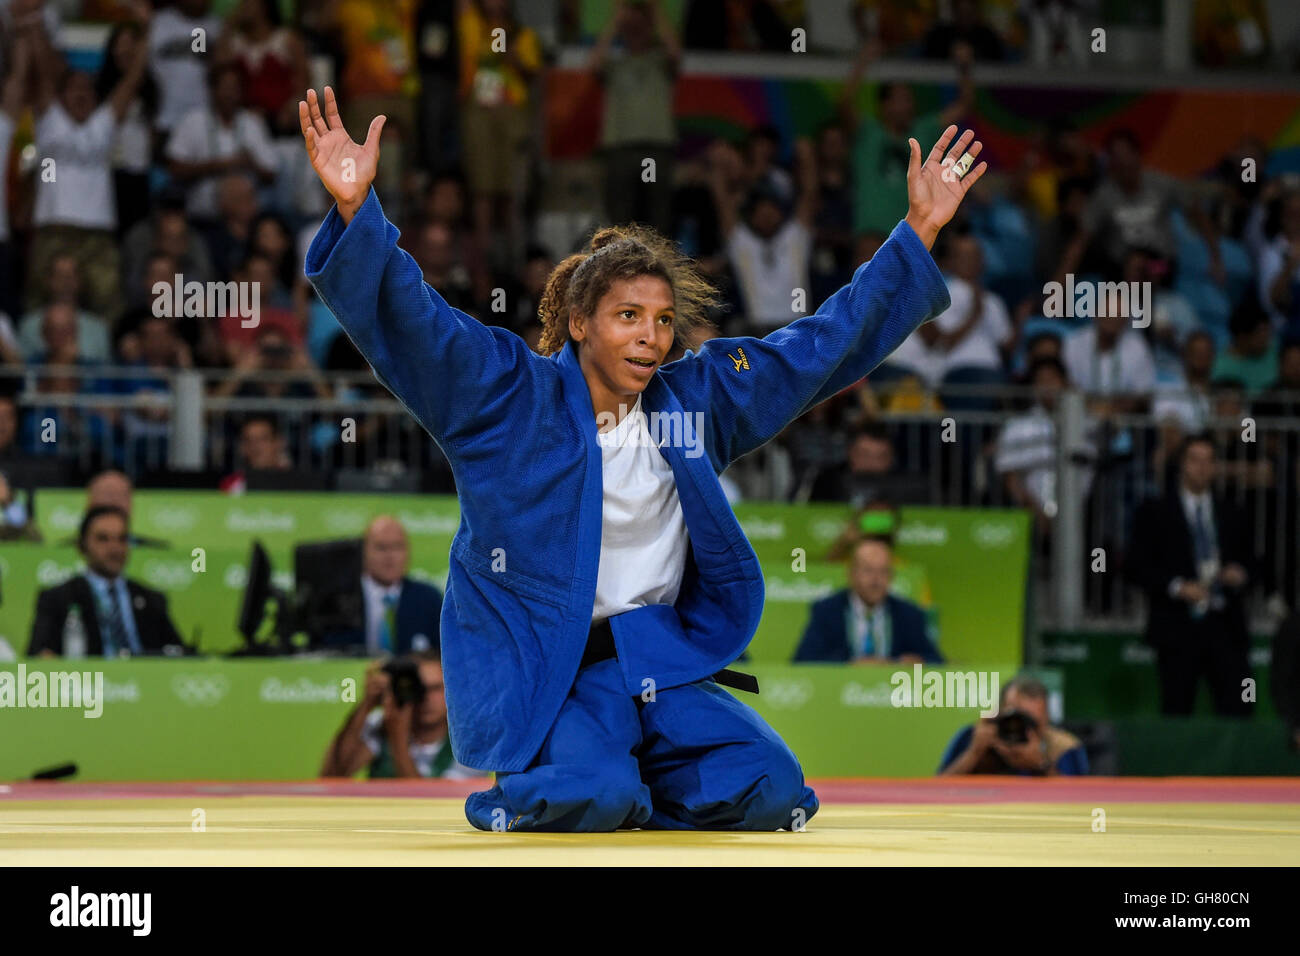 RIO DE JANEIRO, RJ - 08.08.2016: OLYMPICS 2016 JUDO - Sumiya Dorjsuren Mongolia (MGL) and Rafaela Silva of Brazil (BRA) in the gold dispute Judo up to 57 kg female Rio Olympics 2016 held in Carioca Arena 2. NOT AVAILABLE FOR LICENSING IN CHINA (Photo: Celso Pupo/Fotoarena) Stock Photo